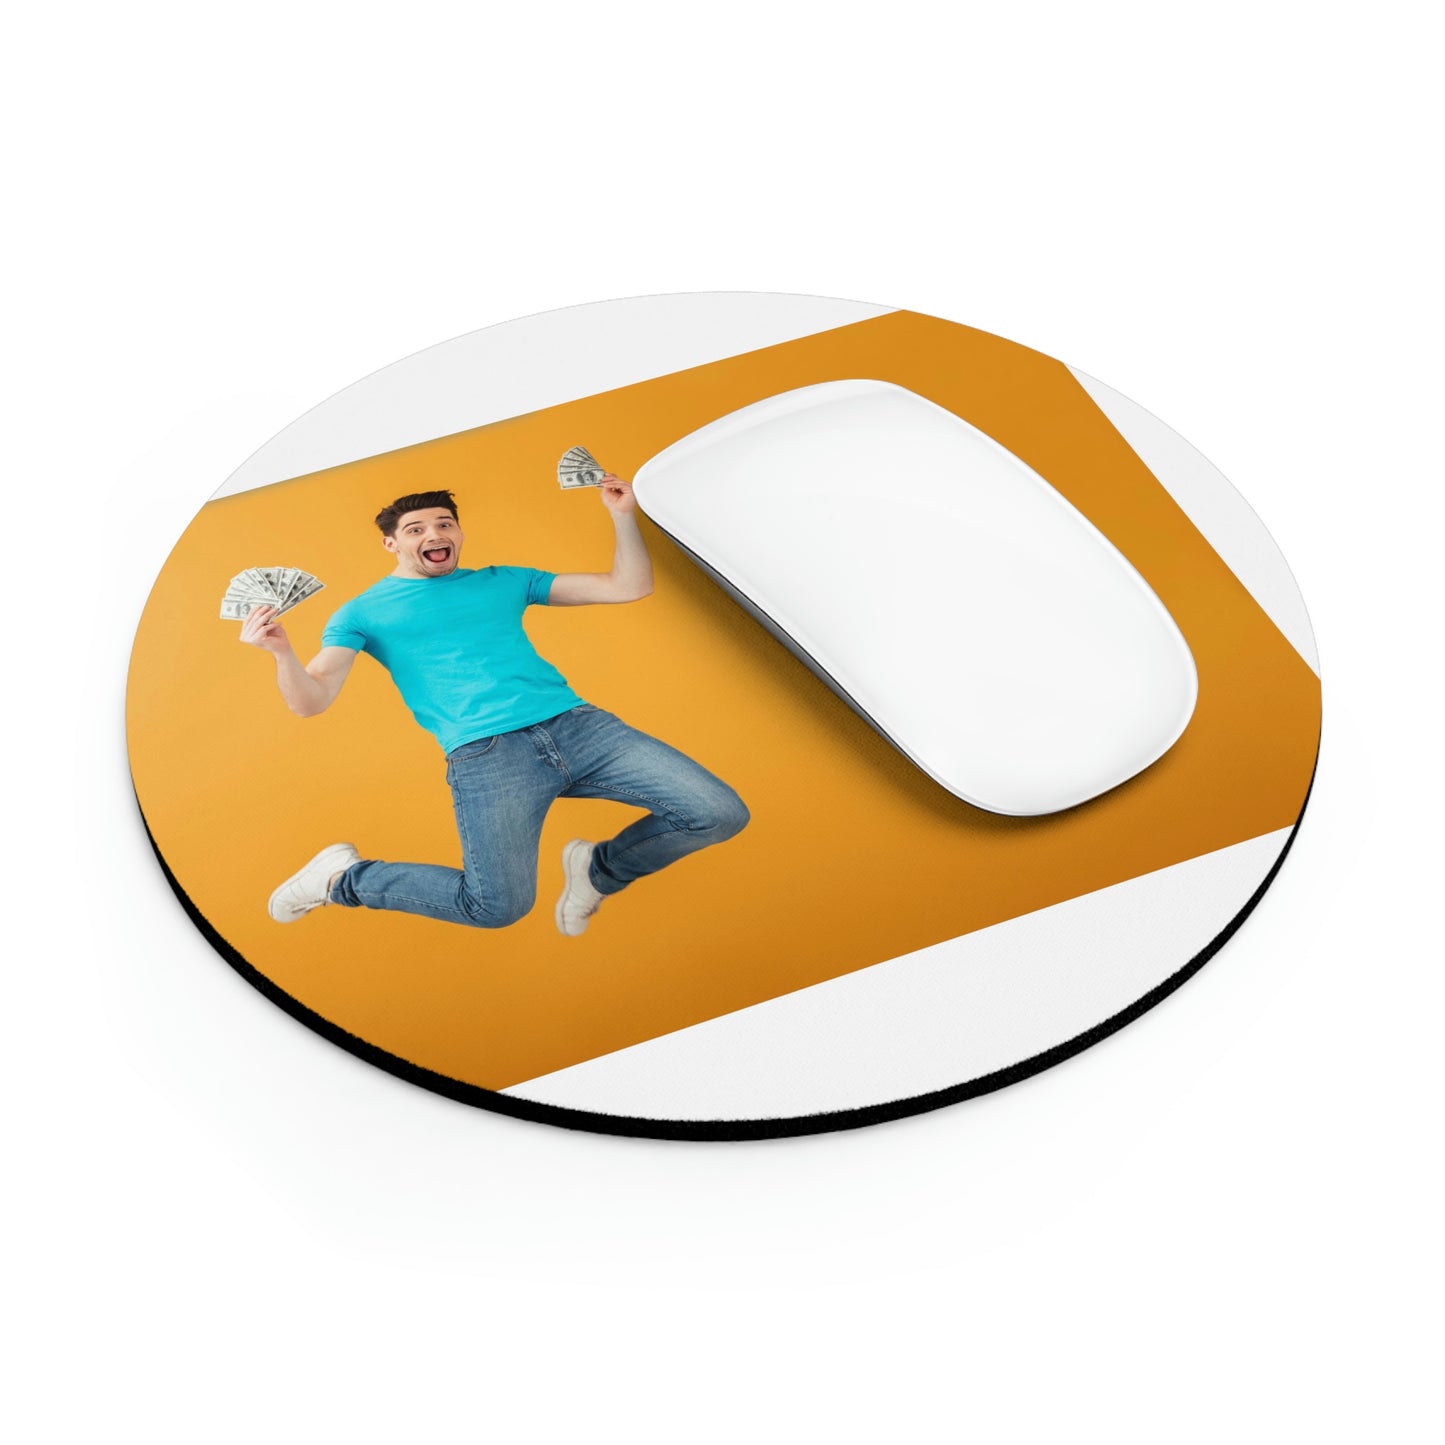 Get Your Finances Jumping with Joy: Circular Mouse Pad with Man Holding Money